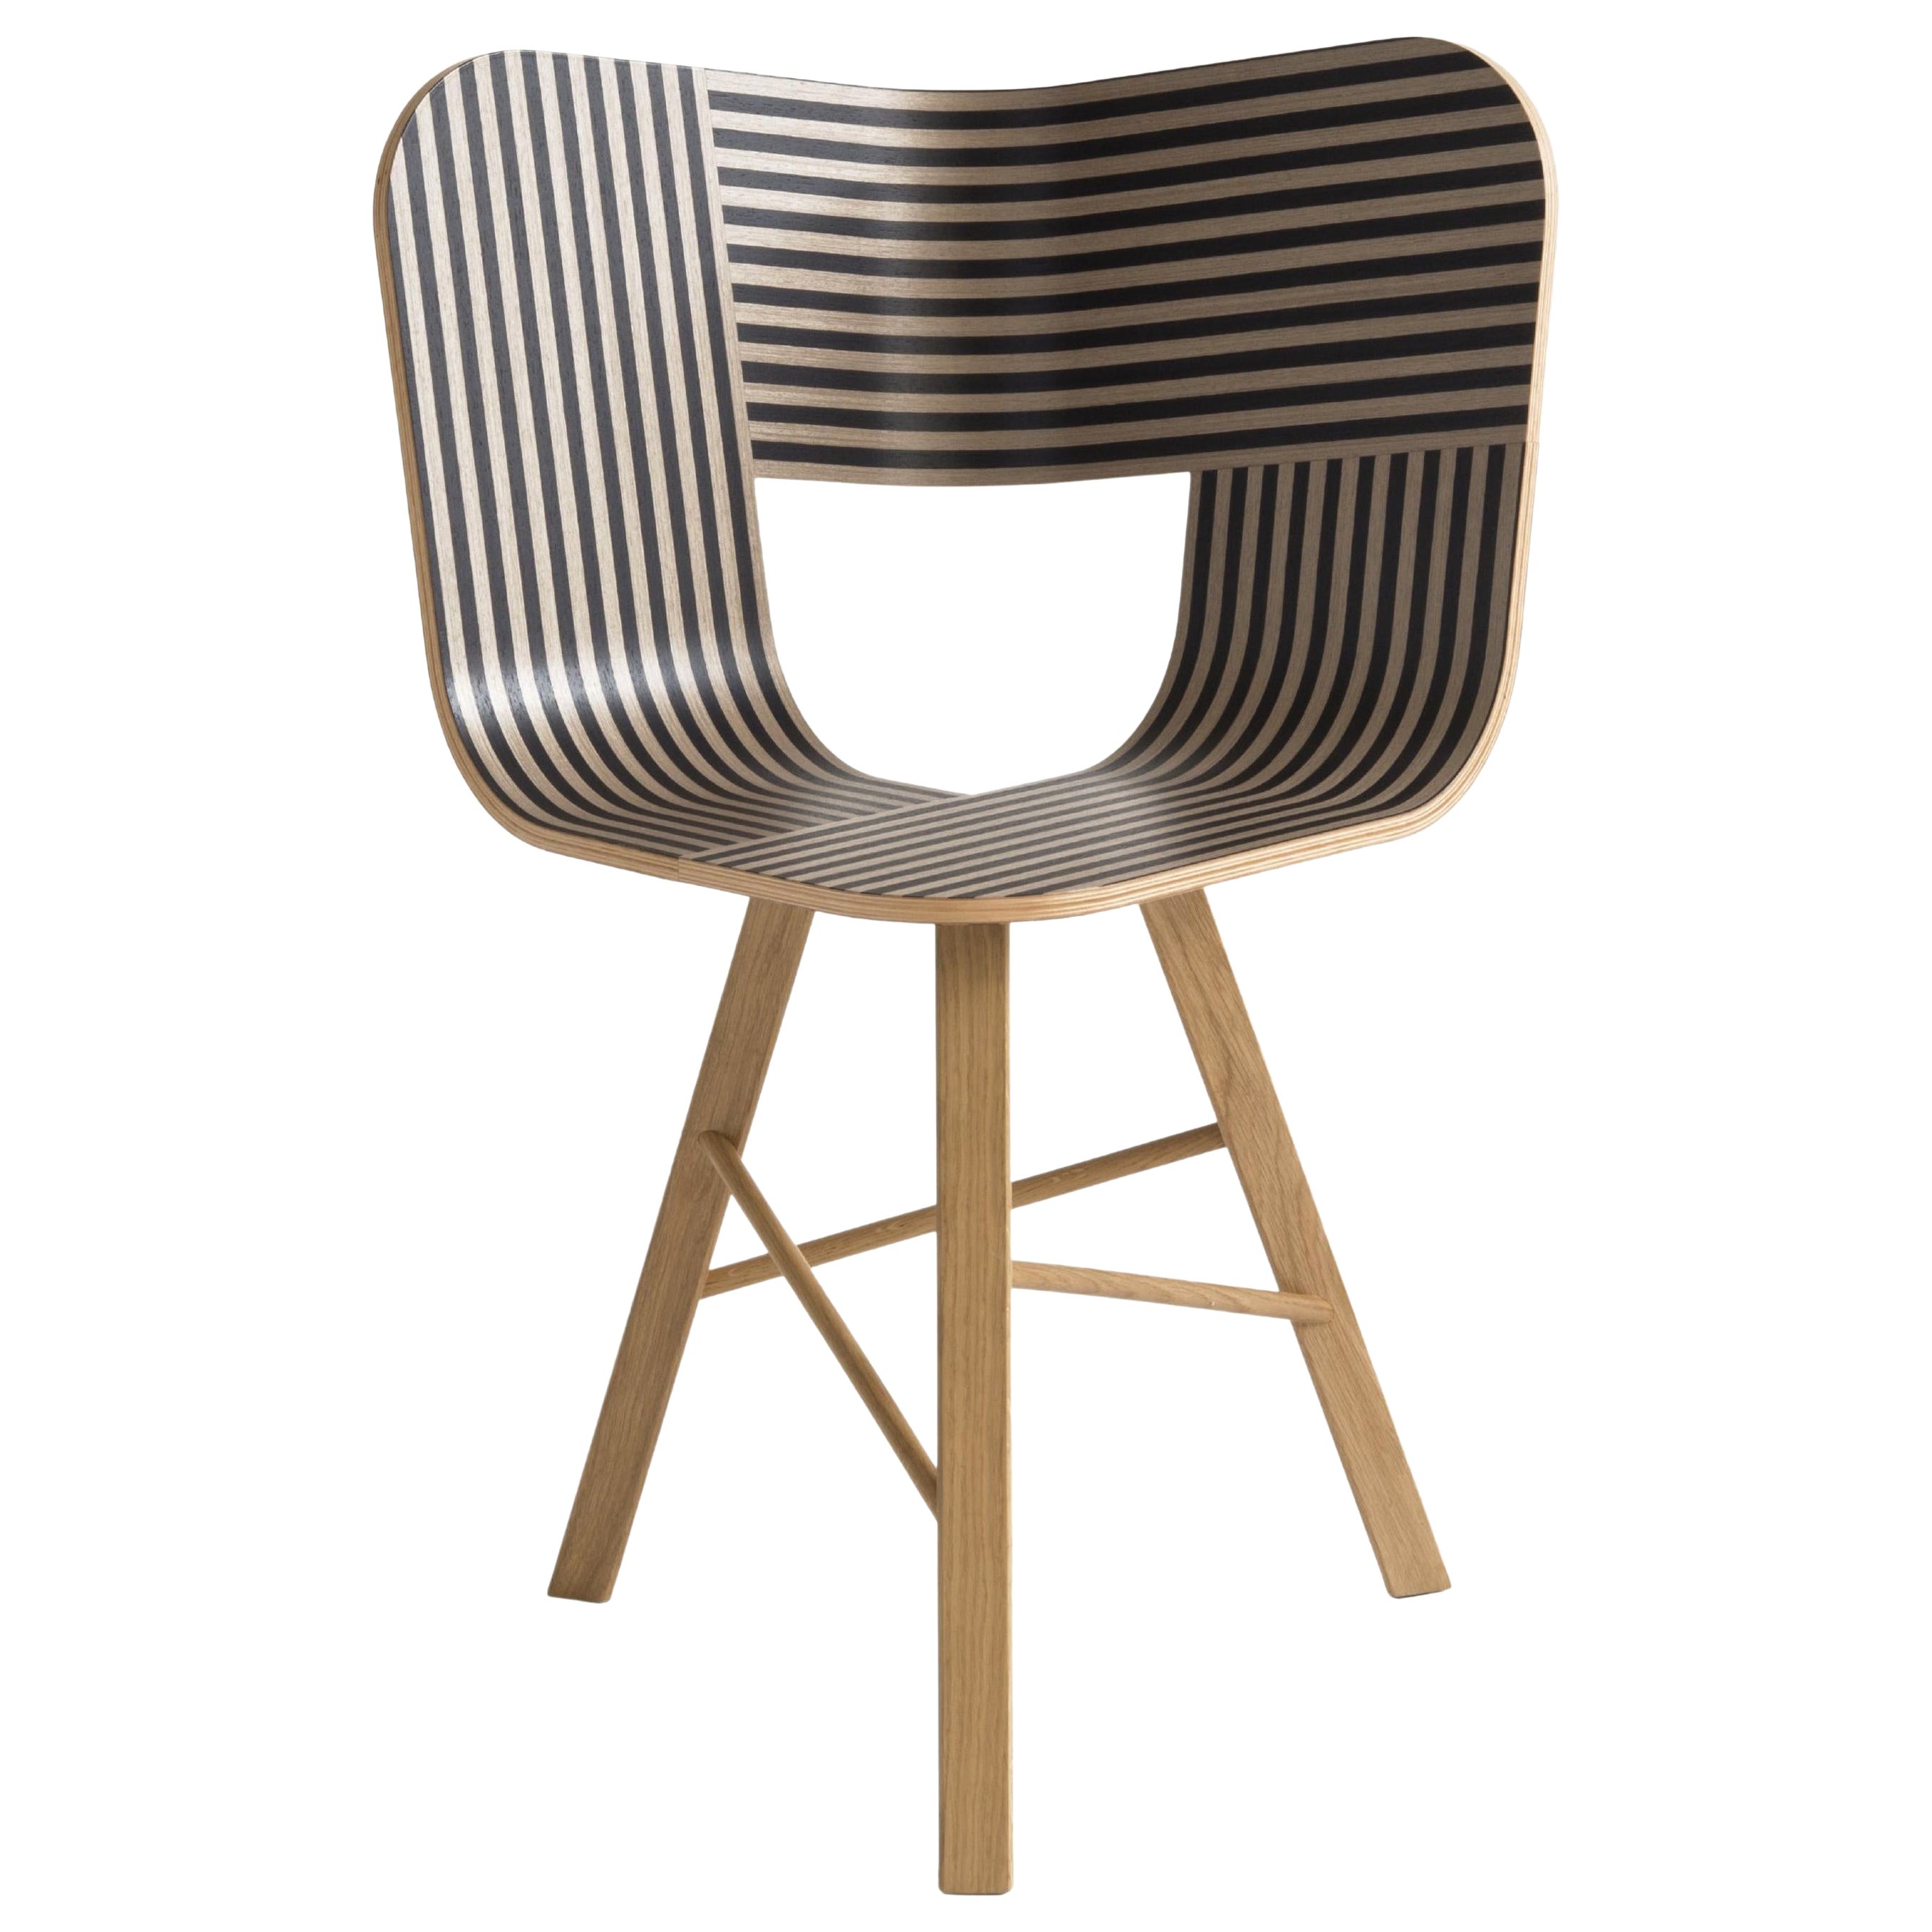 Tria Wood 3 Legs Chair, Striped Seat Ivory and Black by Colé Italia